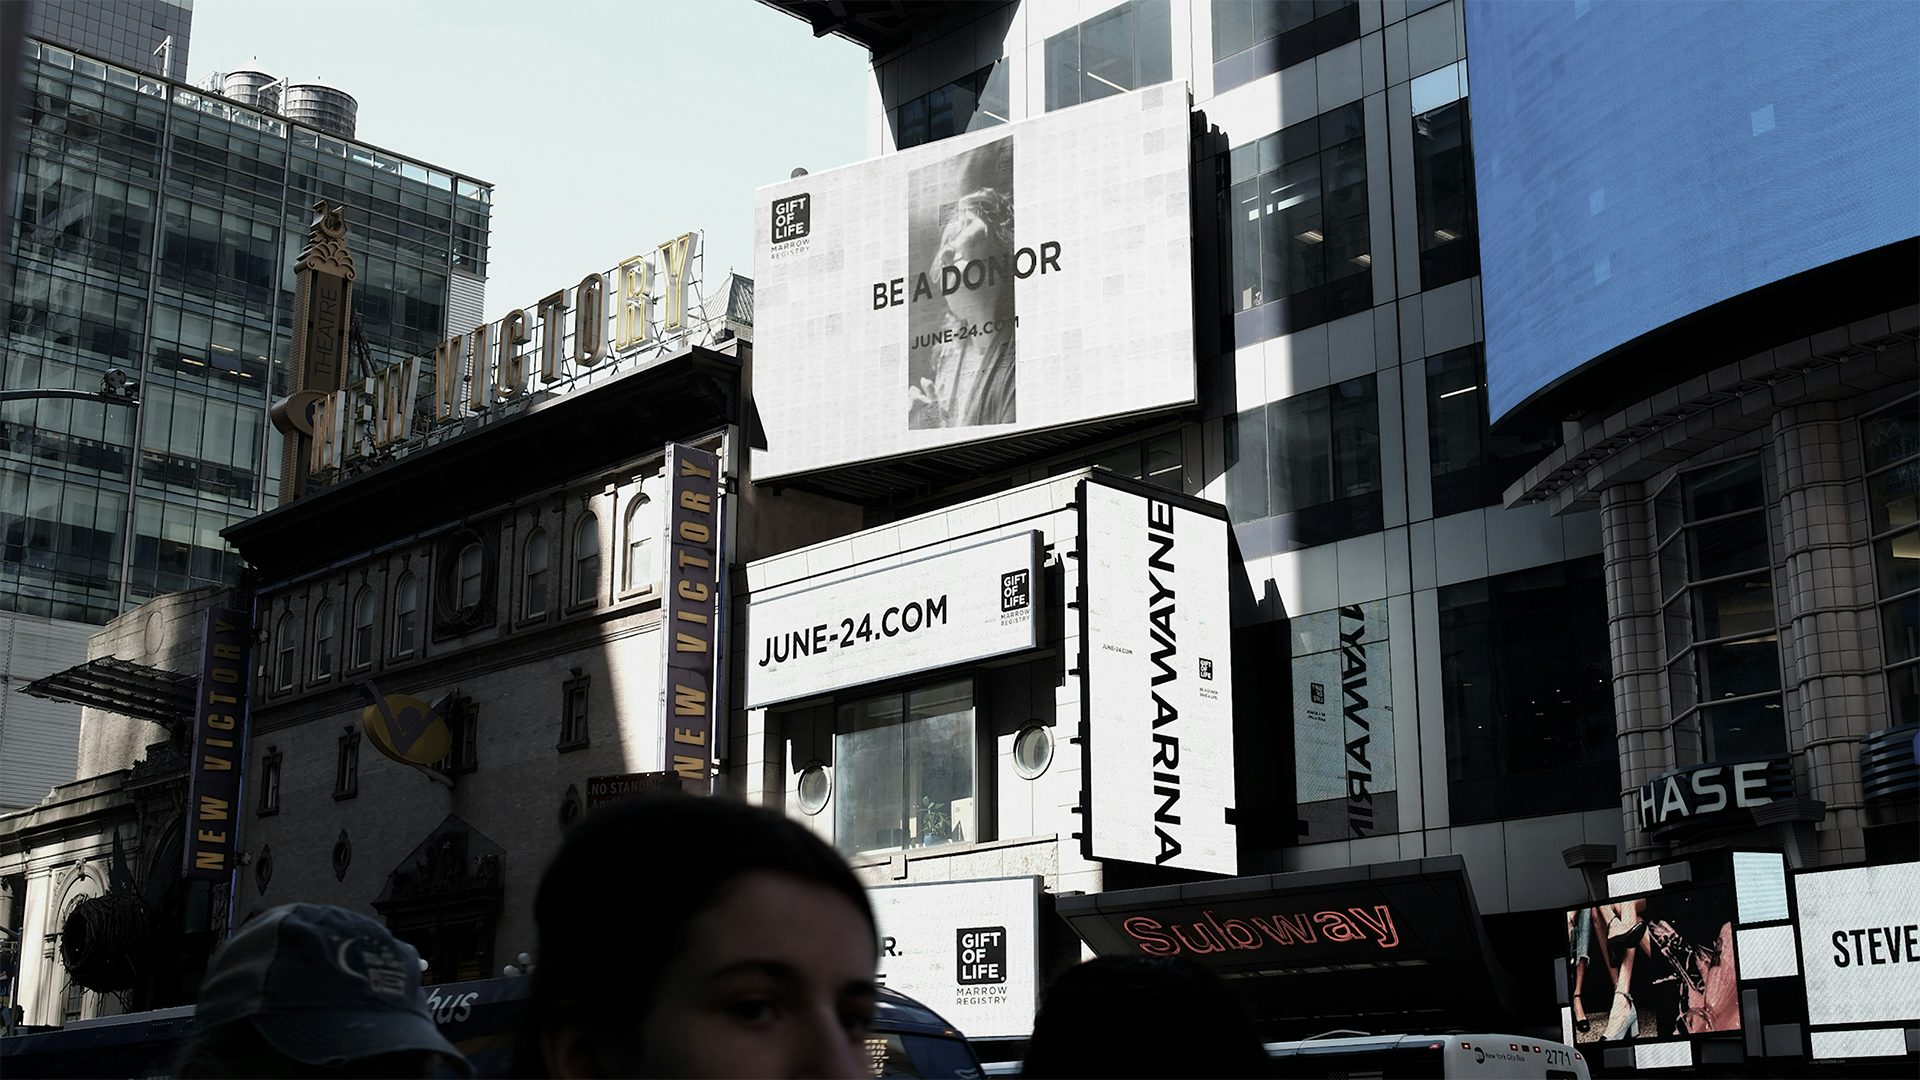 Photograph of white billboards in Times Square, which read the names Wayne and Marina joined by the letter 'M' and 'W', and another that reads 'Be a donor', and another containing a URL